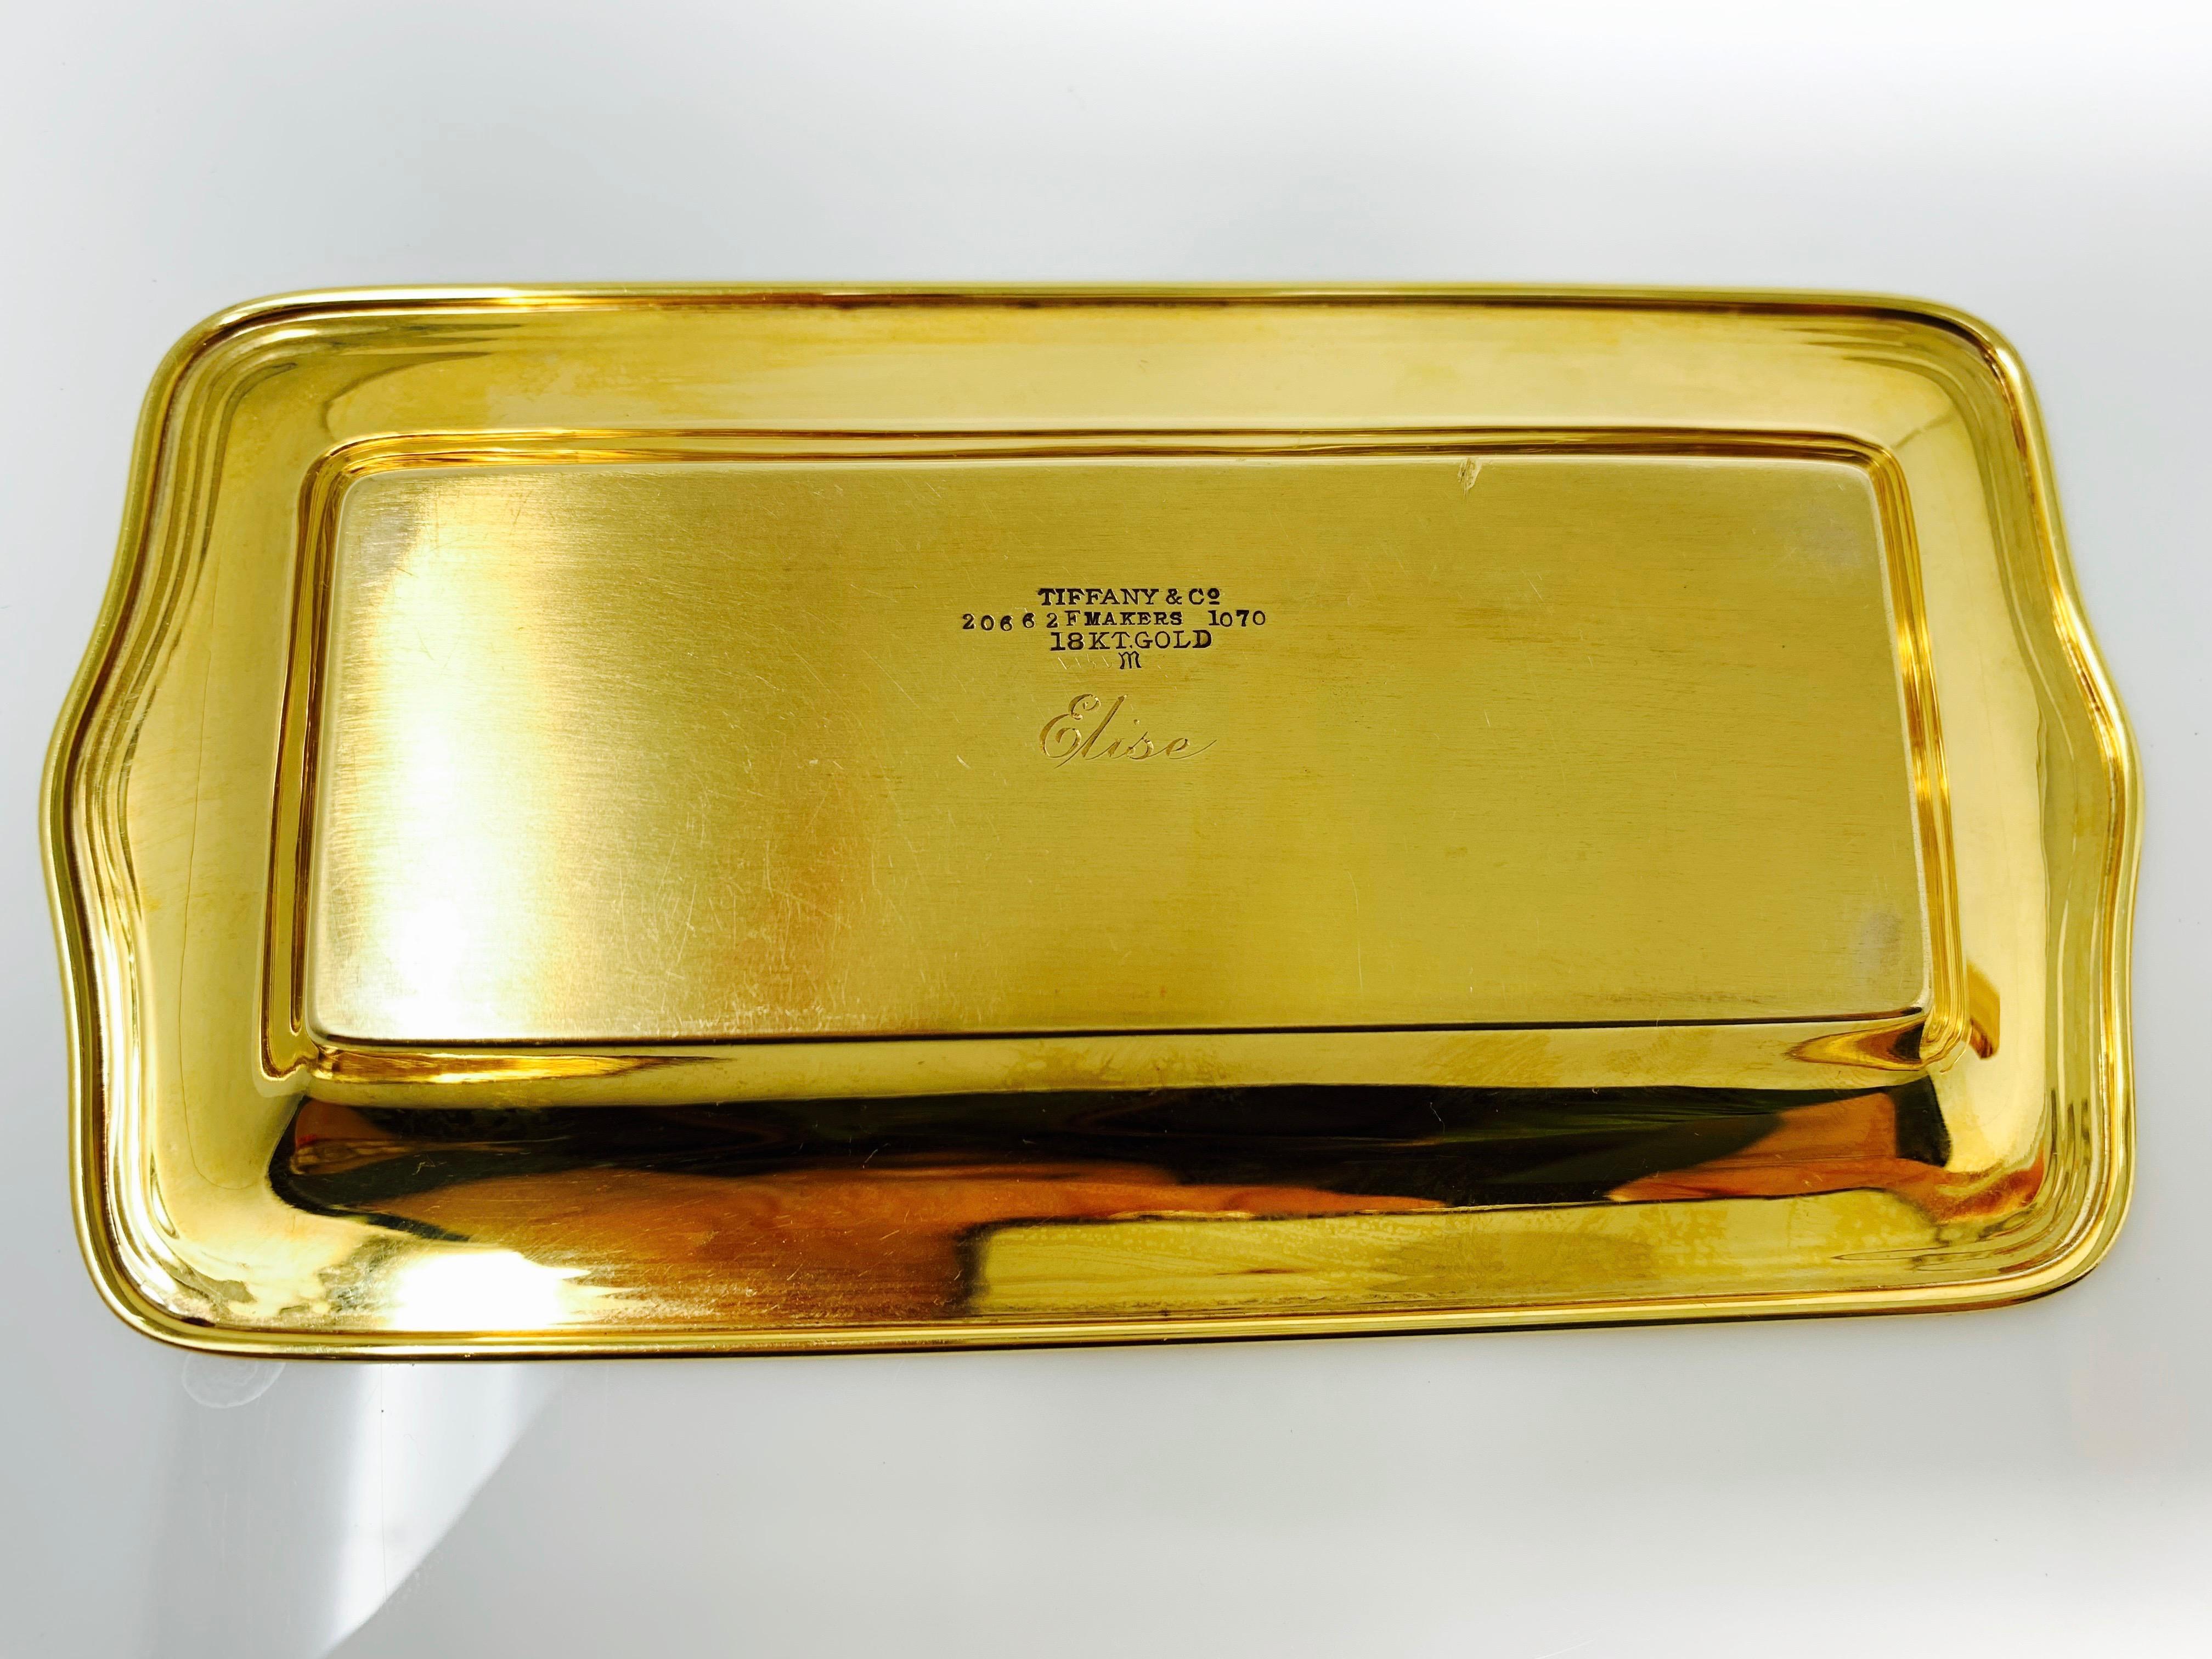 This is a Tiffany and co 18 karat gold tray. It is beautiful and can be used as the center piece for decoration purposes. The tray has a tiffany and co stamp on it. 
Measurements : Length : 5 1/2 inches 
                            width :   3